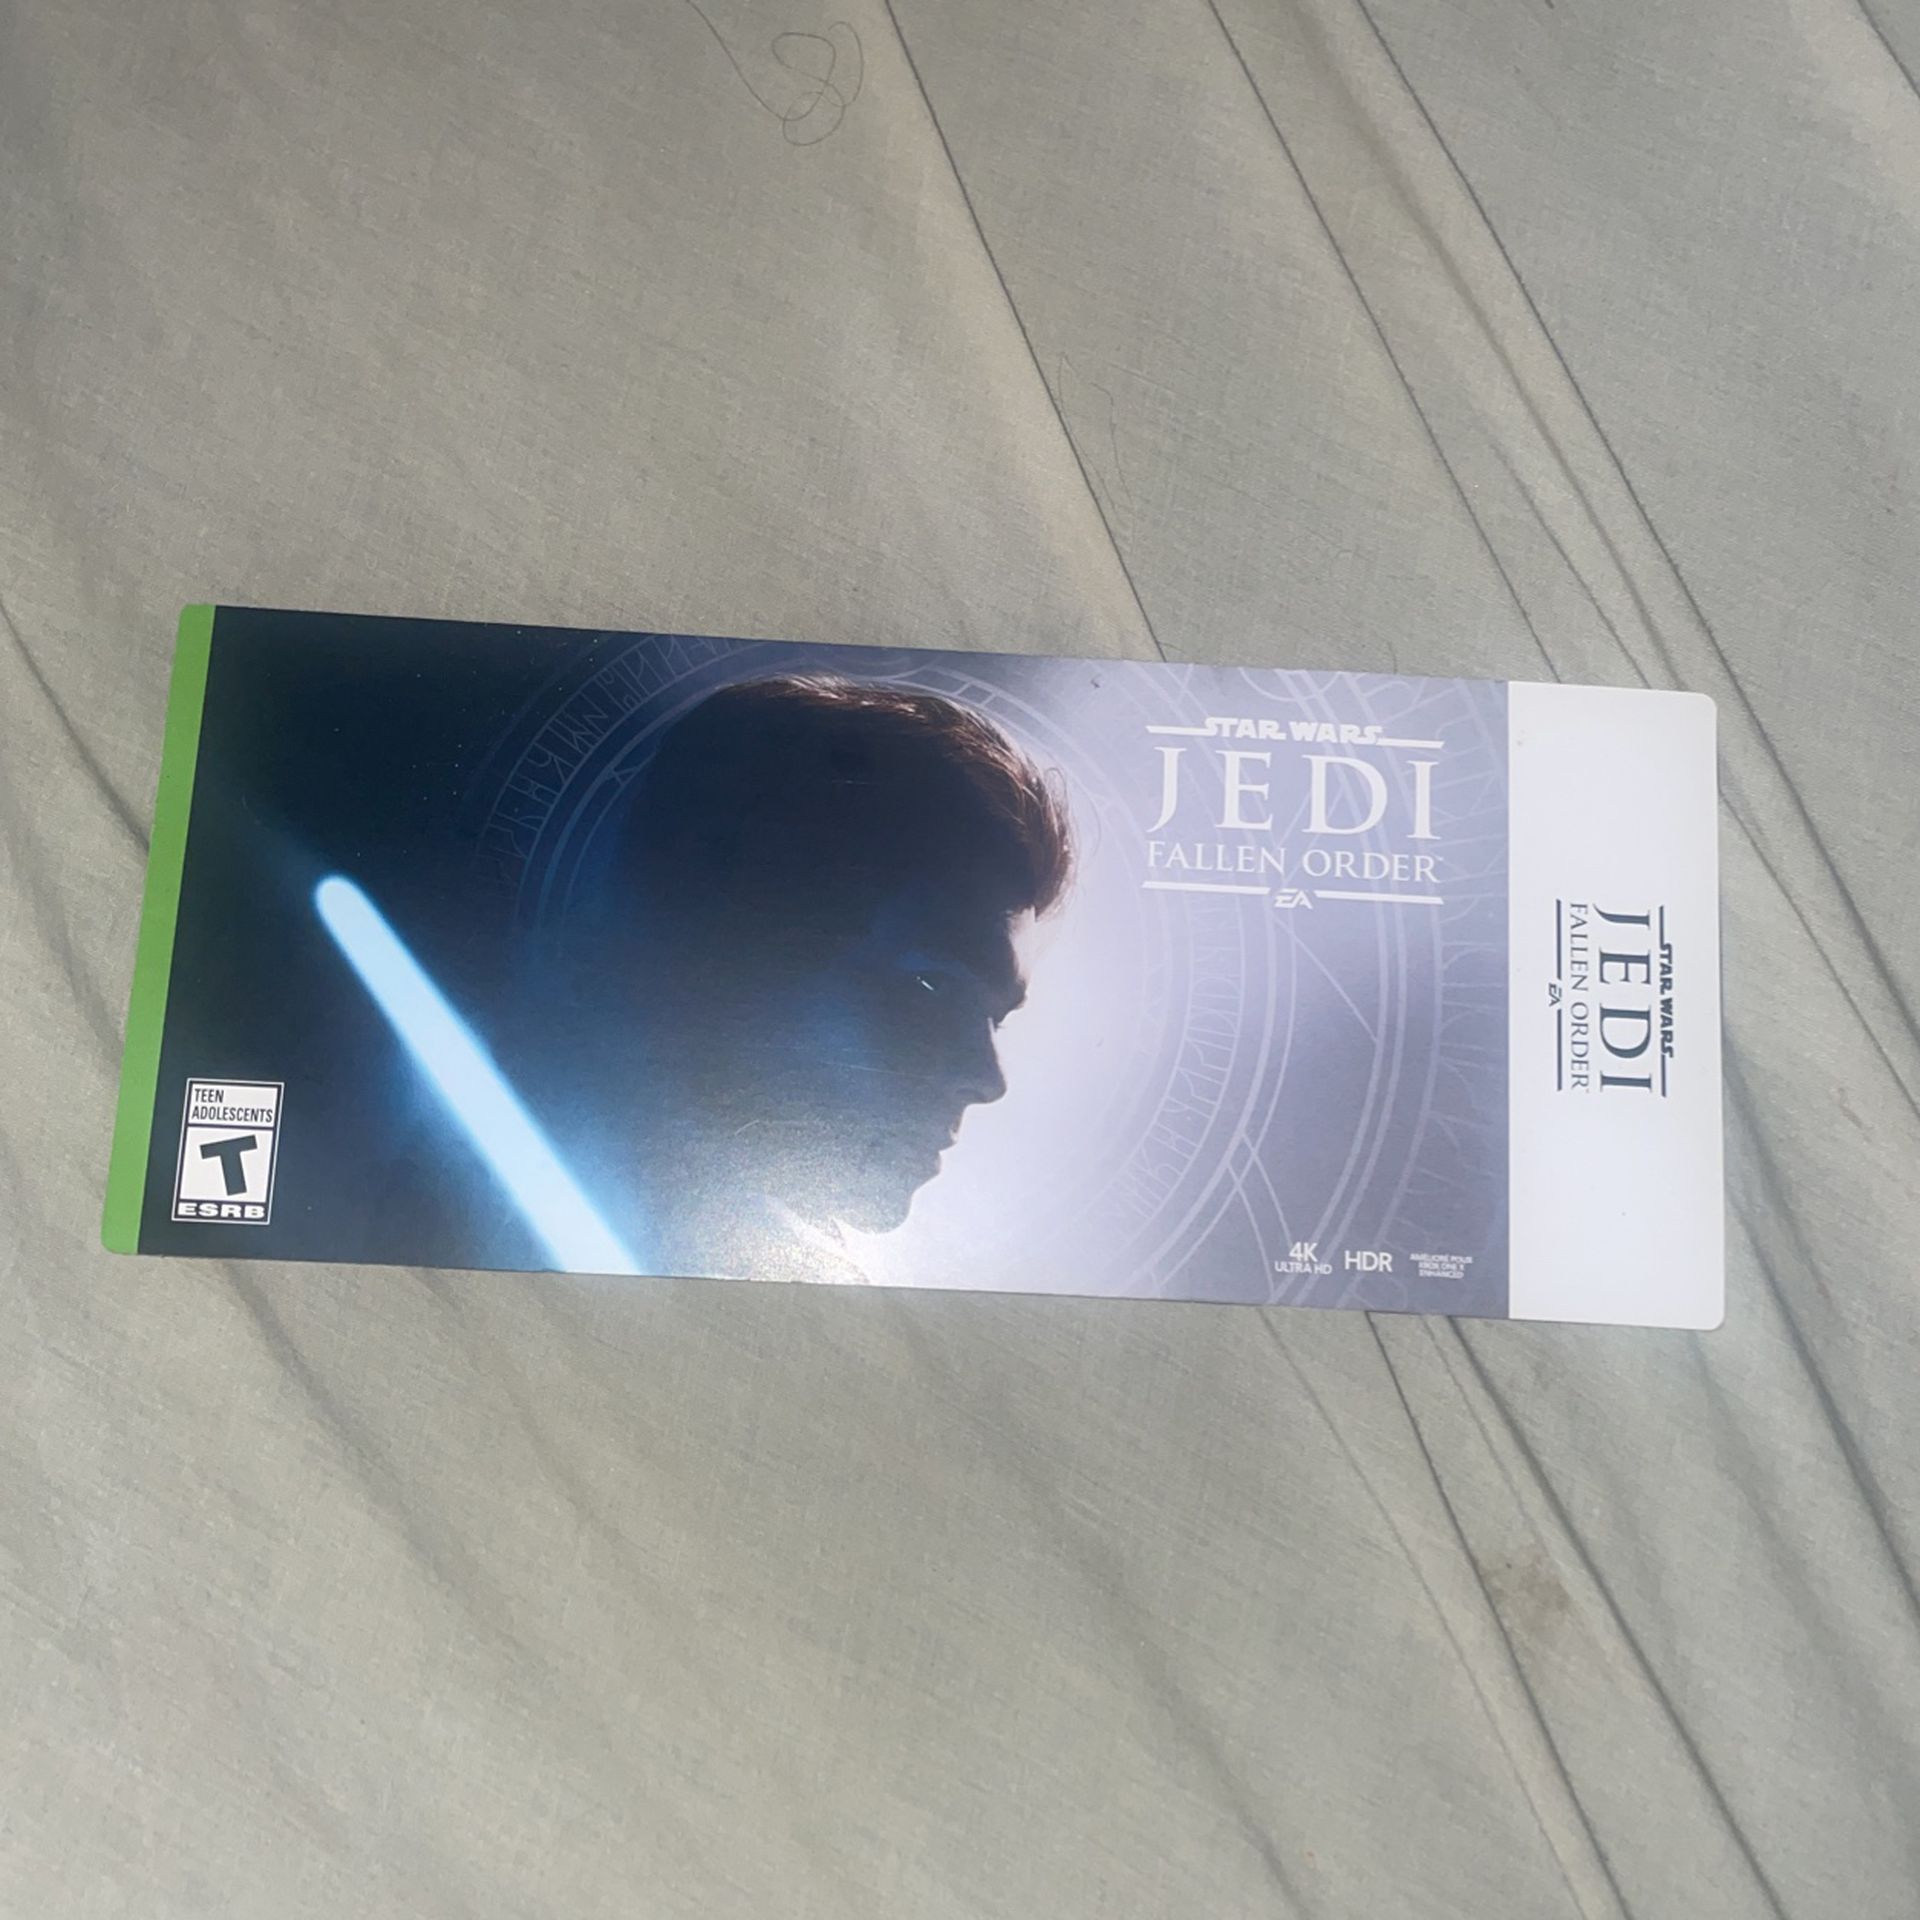 Star Wars Jedi Fallen Order Deluxe Edition for Xbox One